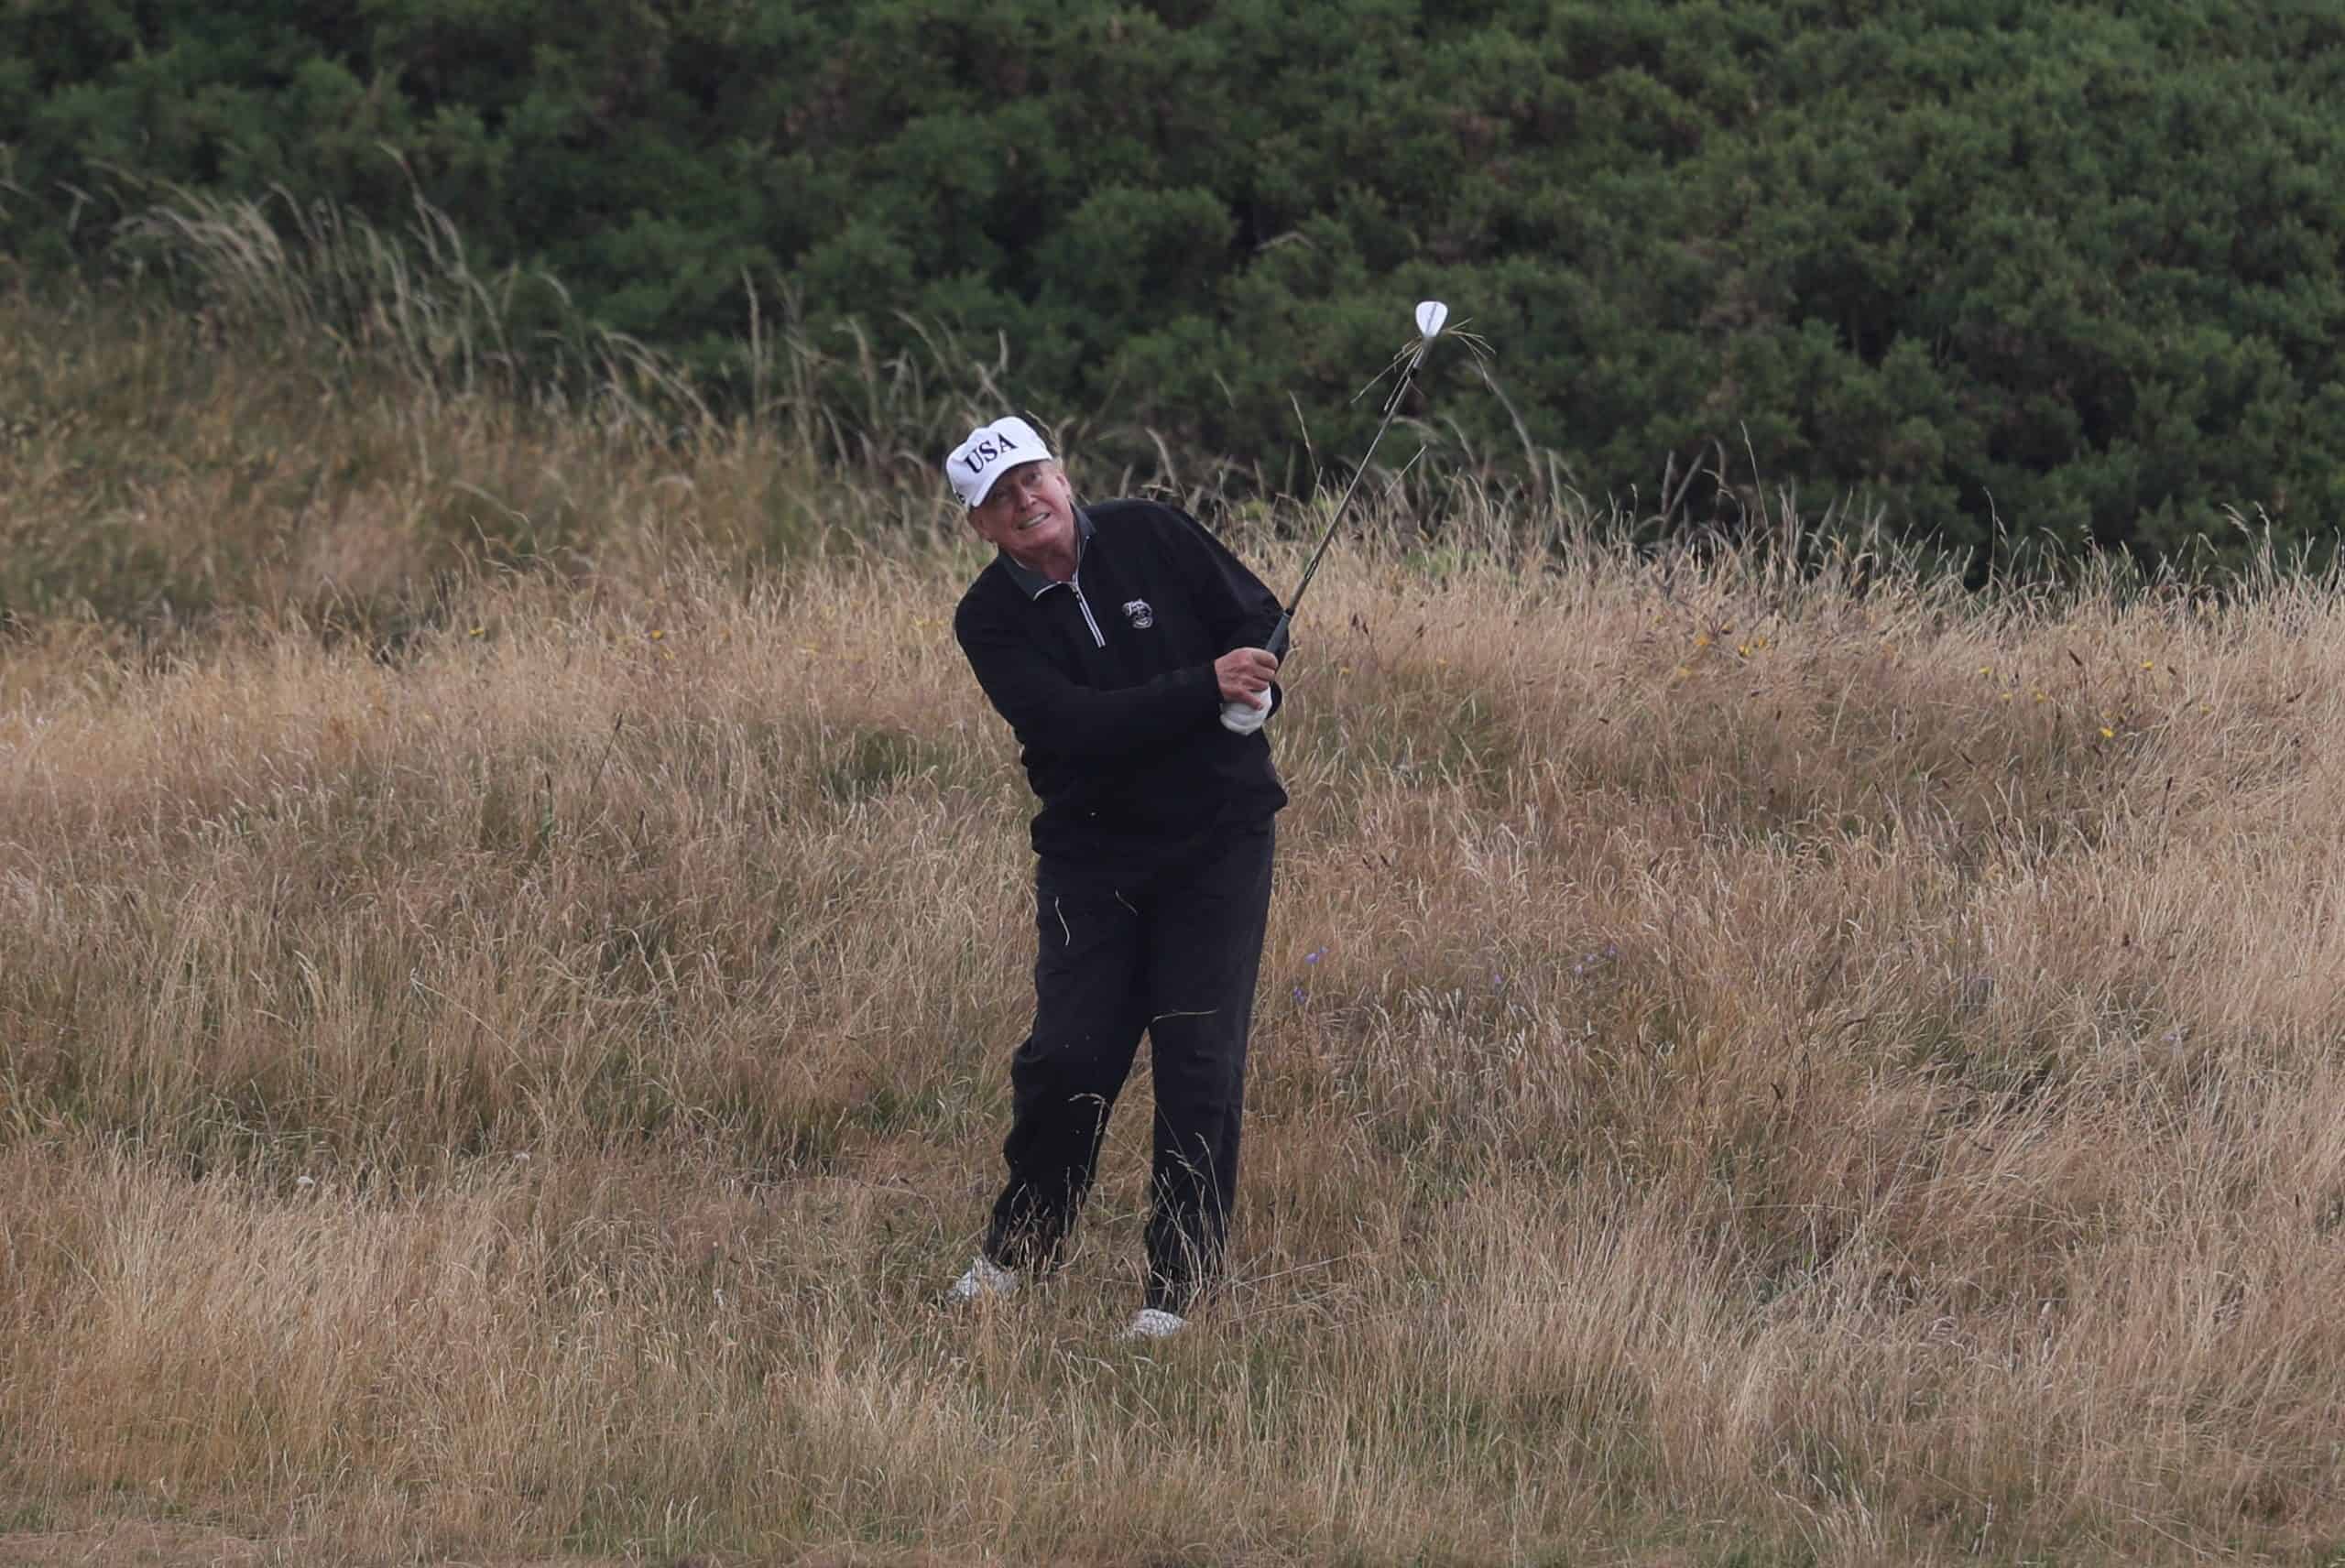 Trump ‘looks like a totally different person’ as he turns up to play Saudi golf competition with no make-up